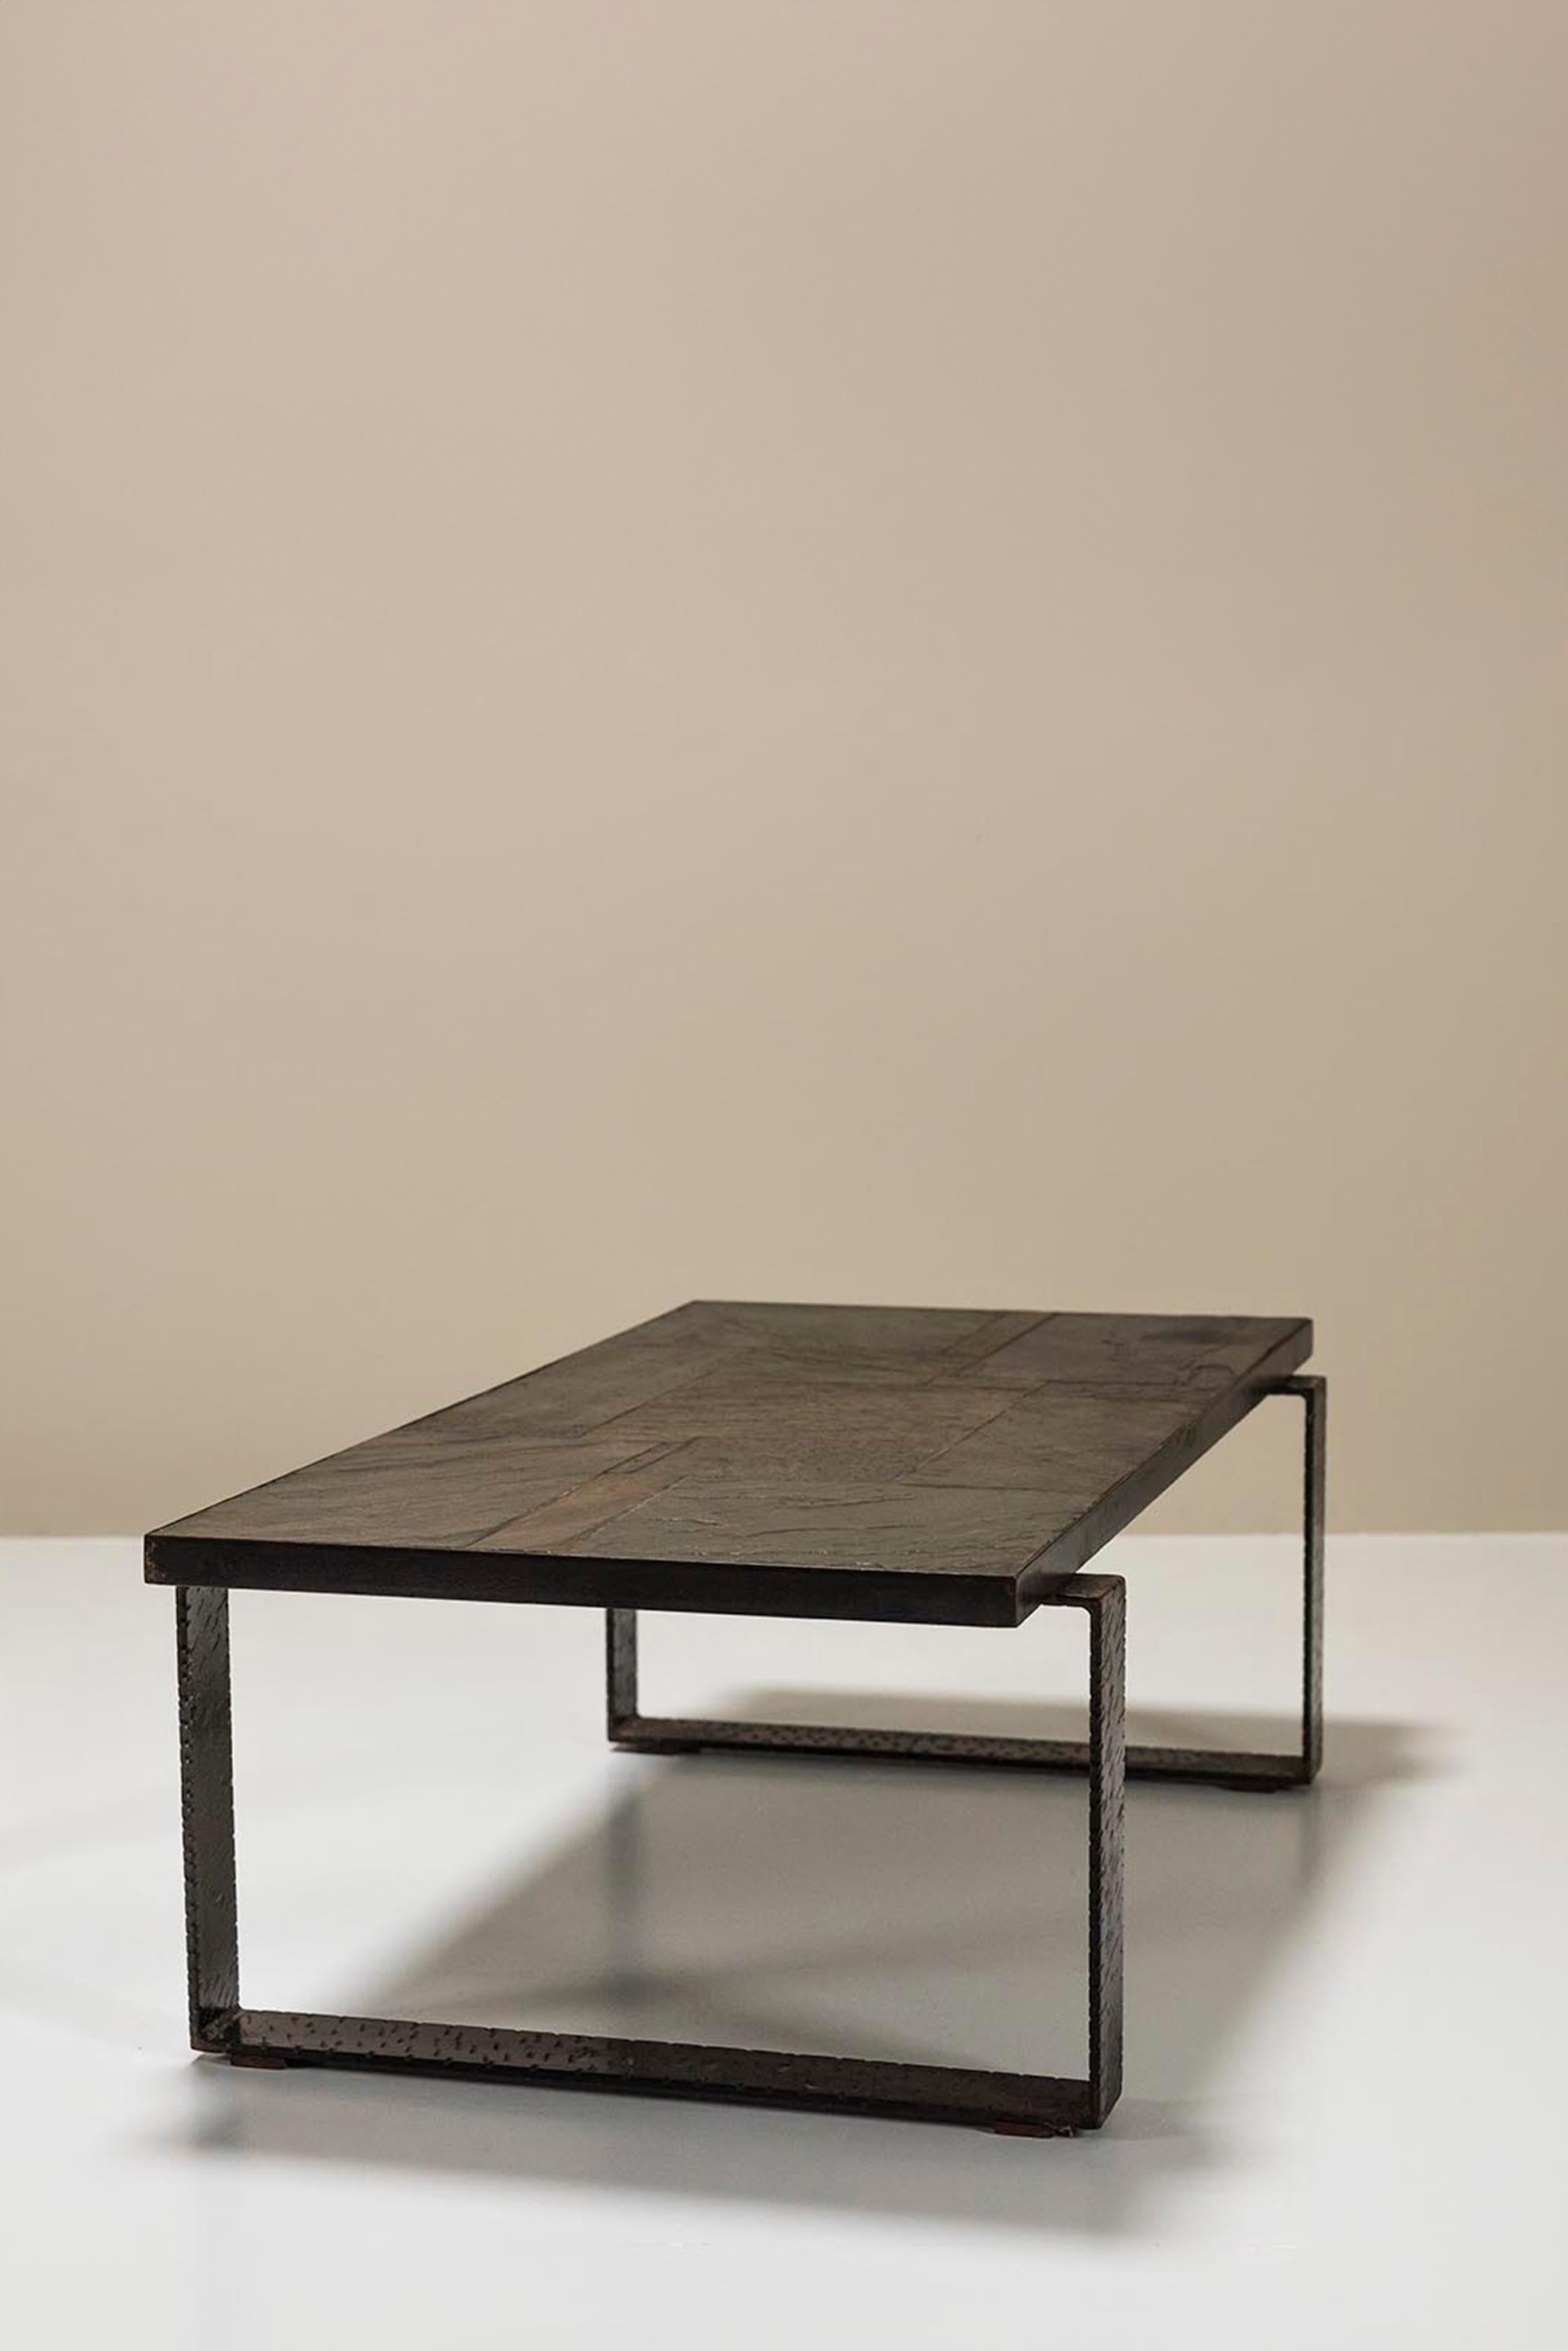 Paul Kingma brutalist coffee table in stone and hammered metal. The rough look and feel of this table is a typical trademark of the Dutch sculptor, mosaic artist, painter and draftsman Paul Kingma. In the early 1960s he started making these types of